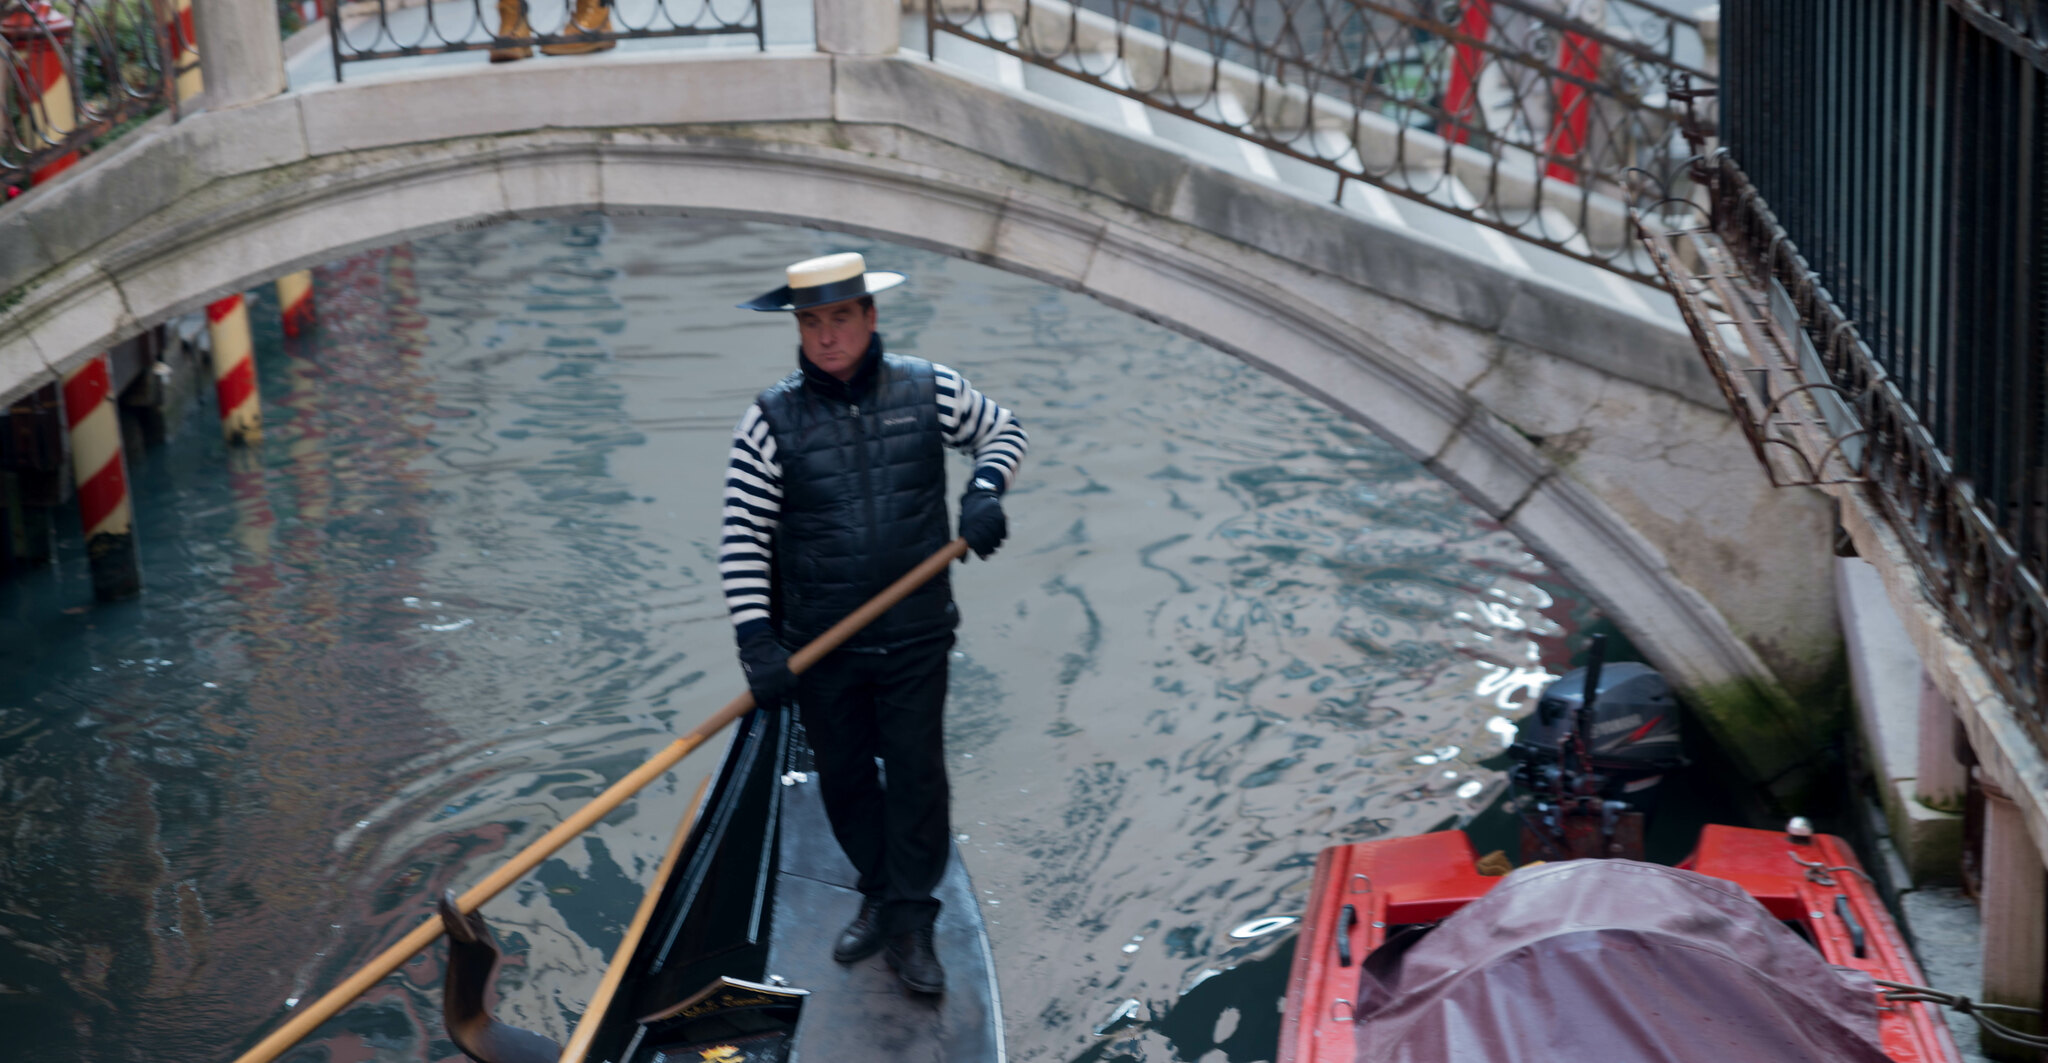 Gondolier rowing his gondola down a canal in Venice italy